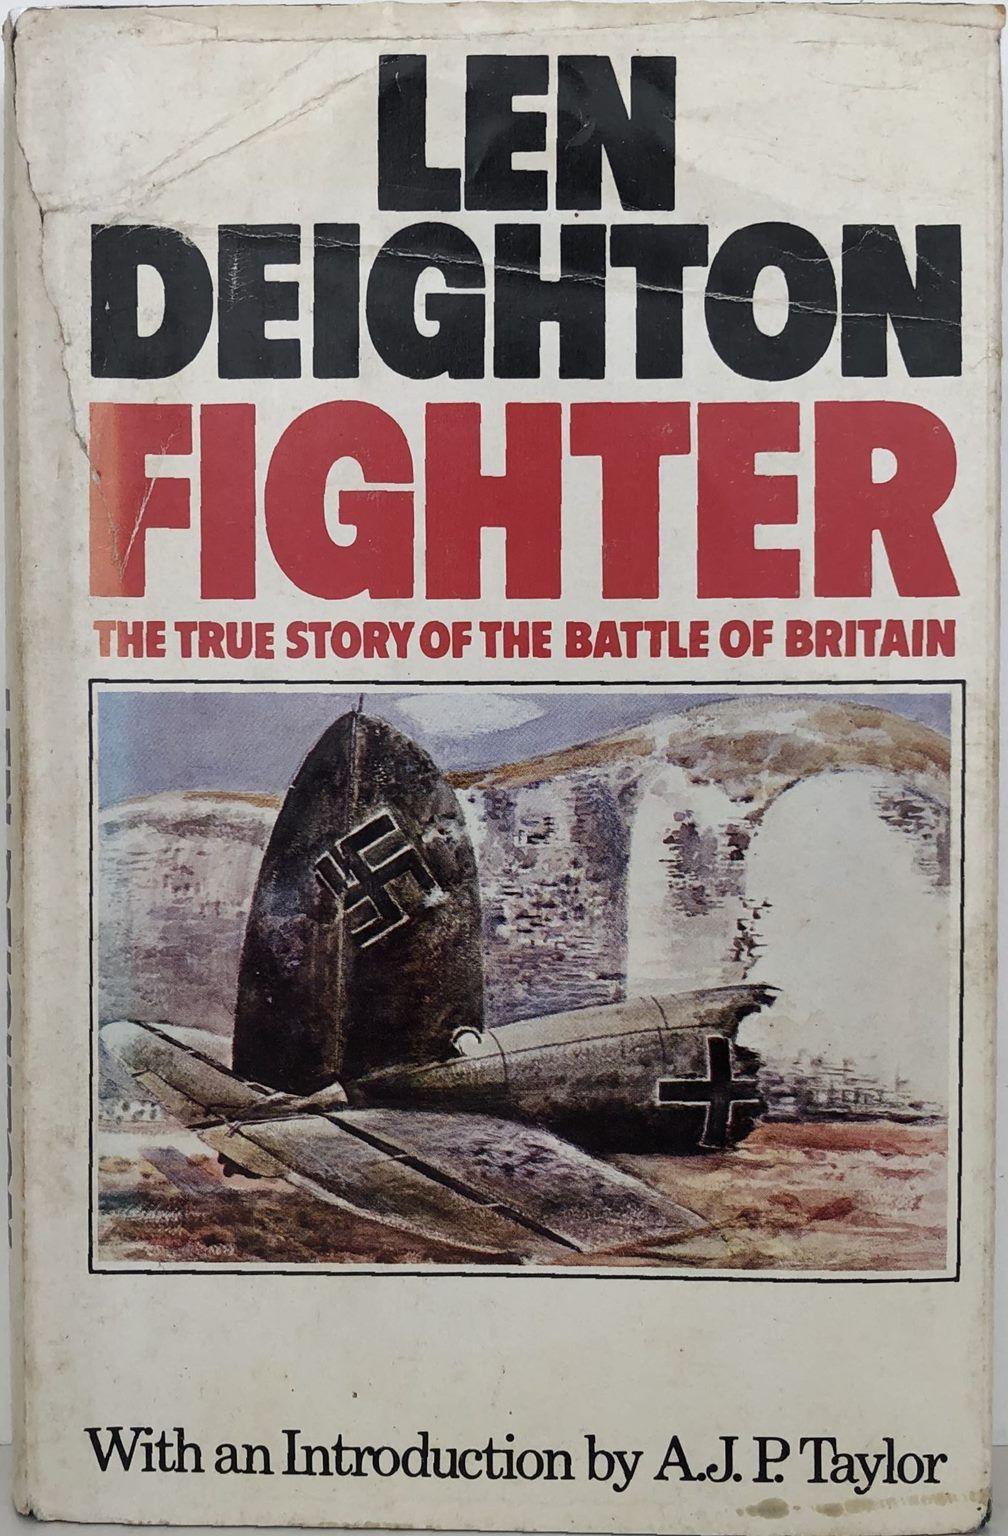 FIGHTER: The True Story of the Battle of Britain